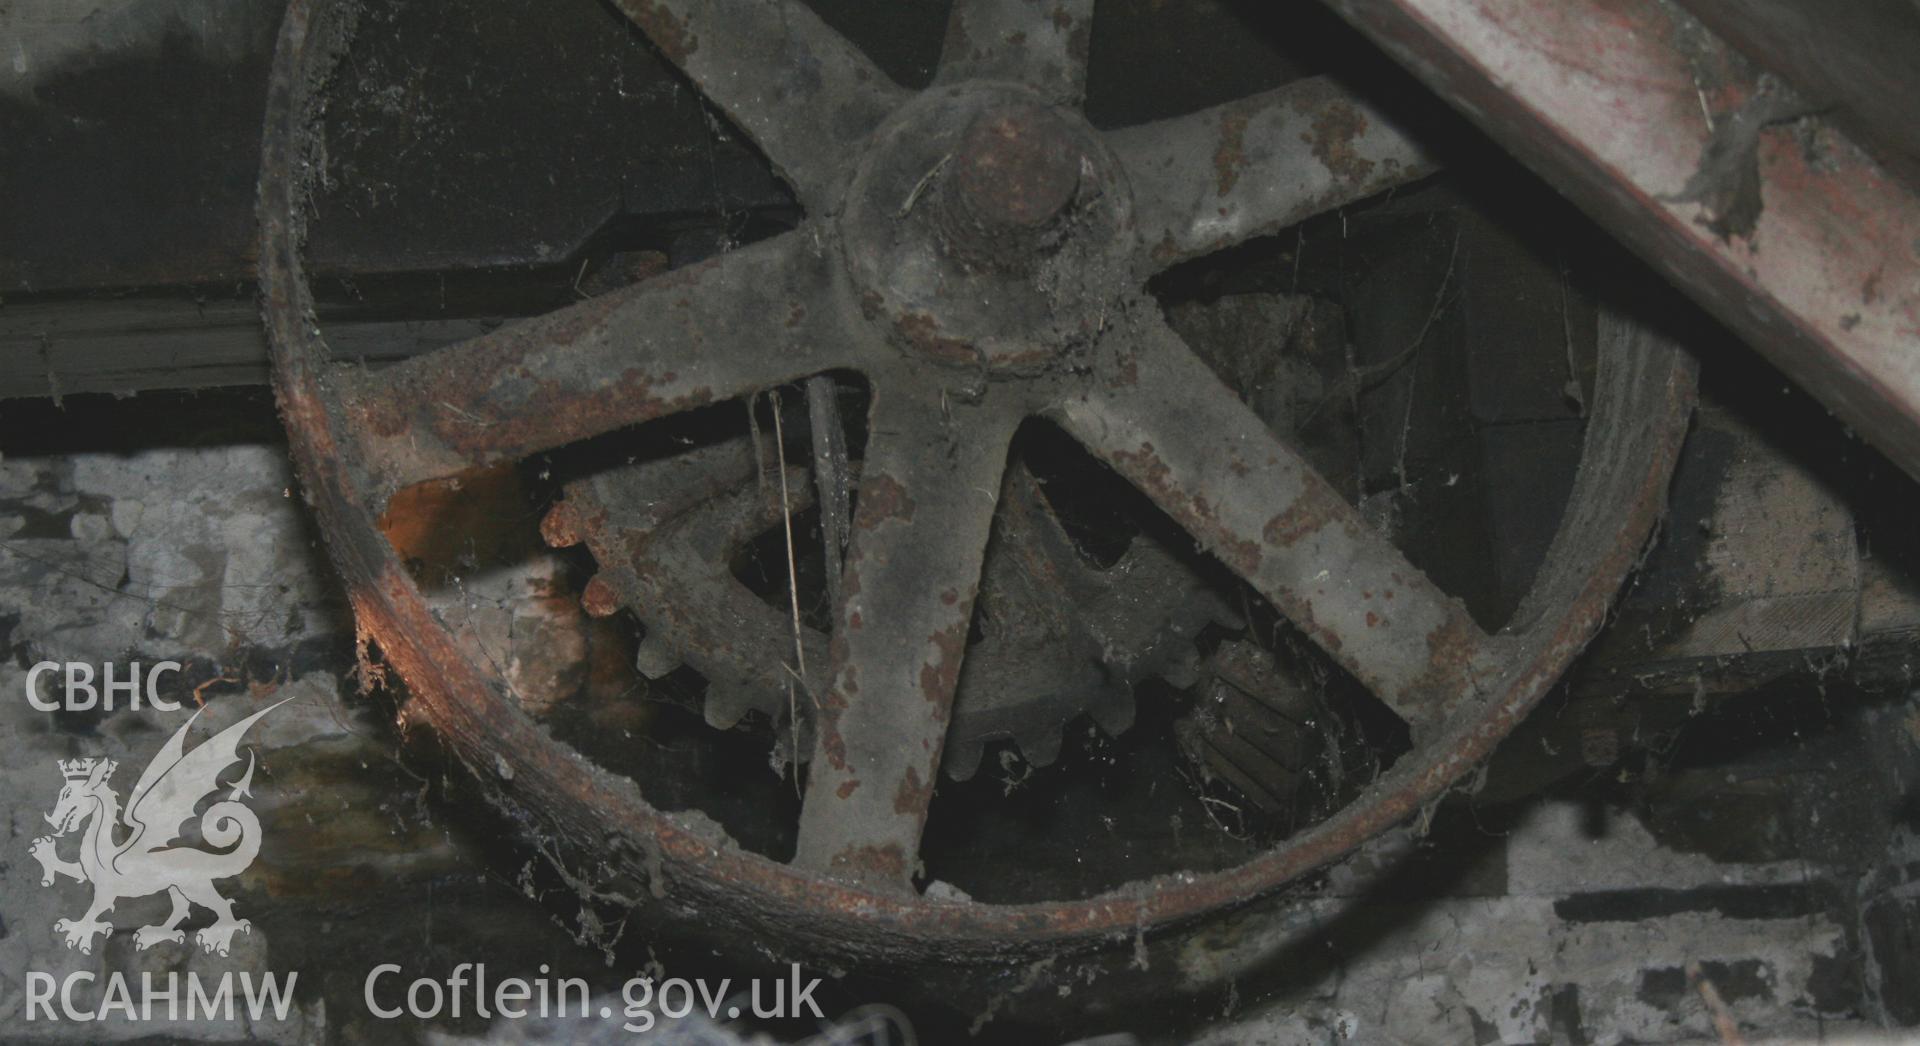 Detail of iron cogs on threshing machine. Photographic survey of the threshing machine in the threshing house at Tan-y-Graig Farm, Llanfarian. Conducted by Geoff Ward and John Wiles 11th December 2016.